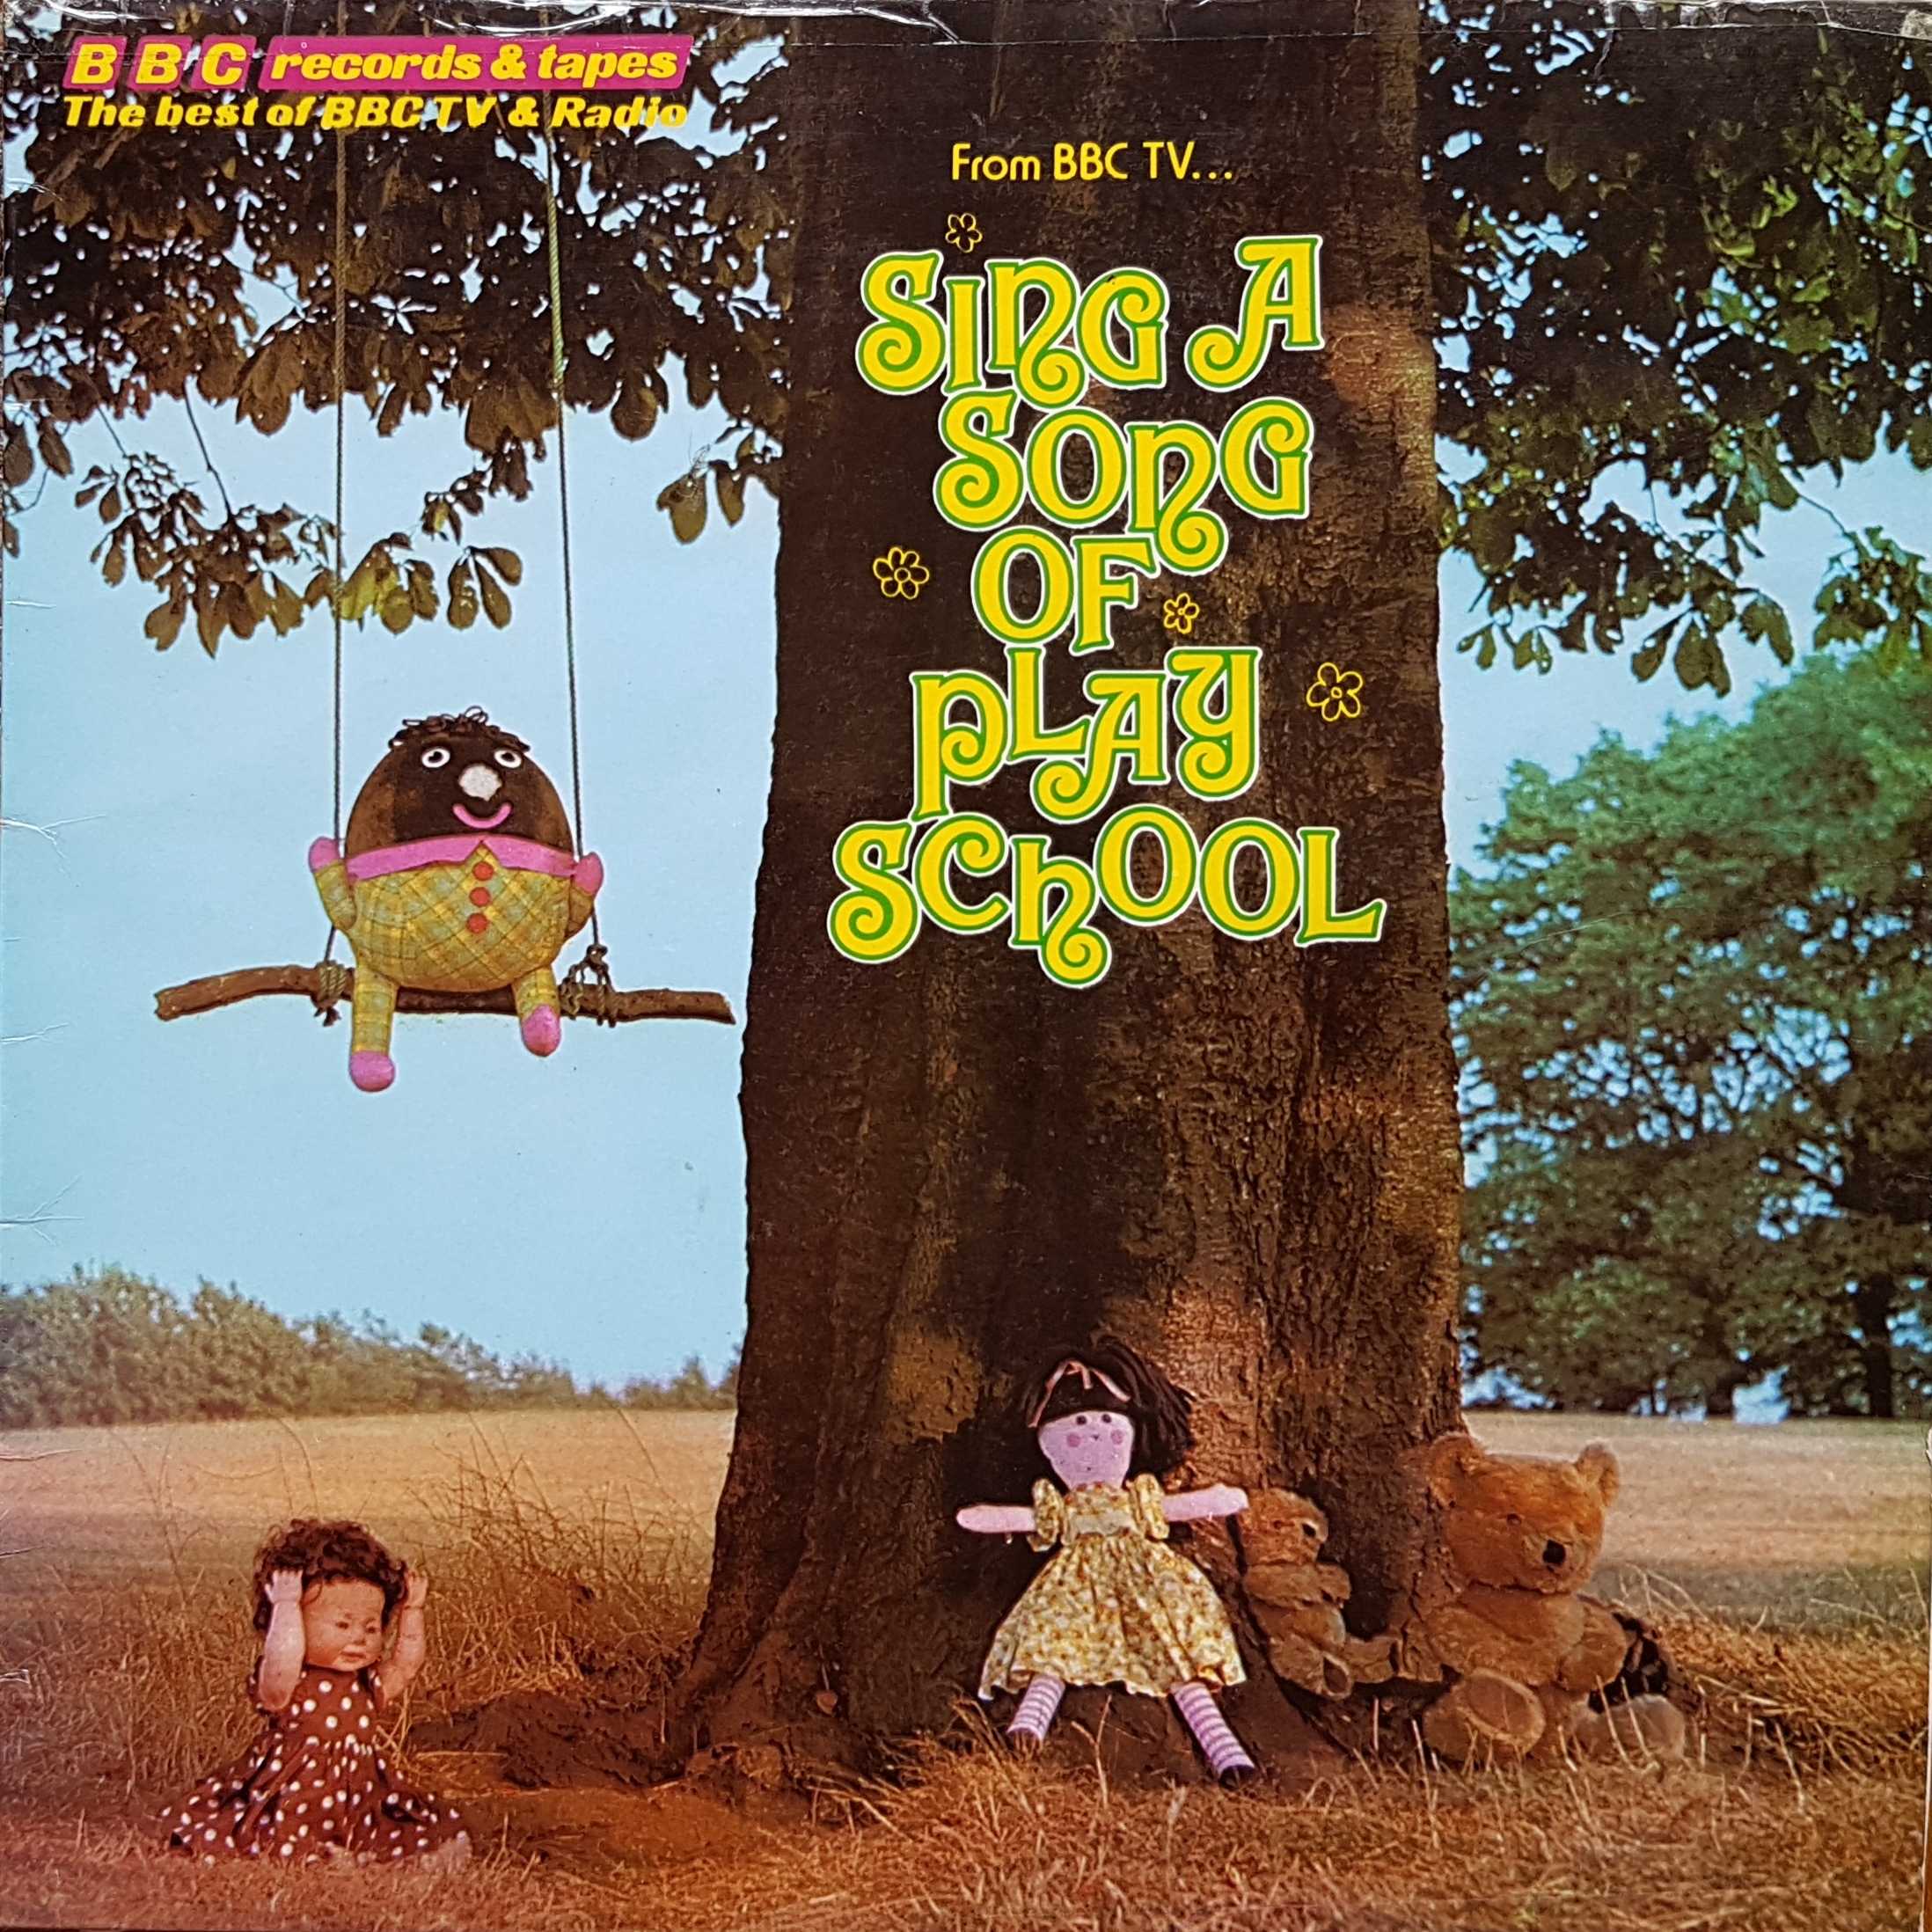 Picture of REC 212 Sing a song of play school by artist Carol Chell from the BBC albums - Records and Tapes library